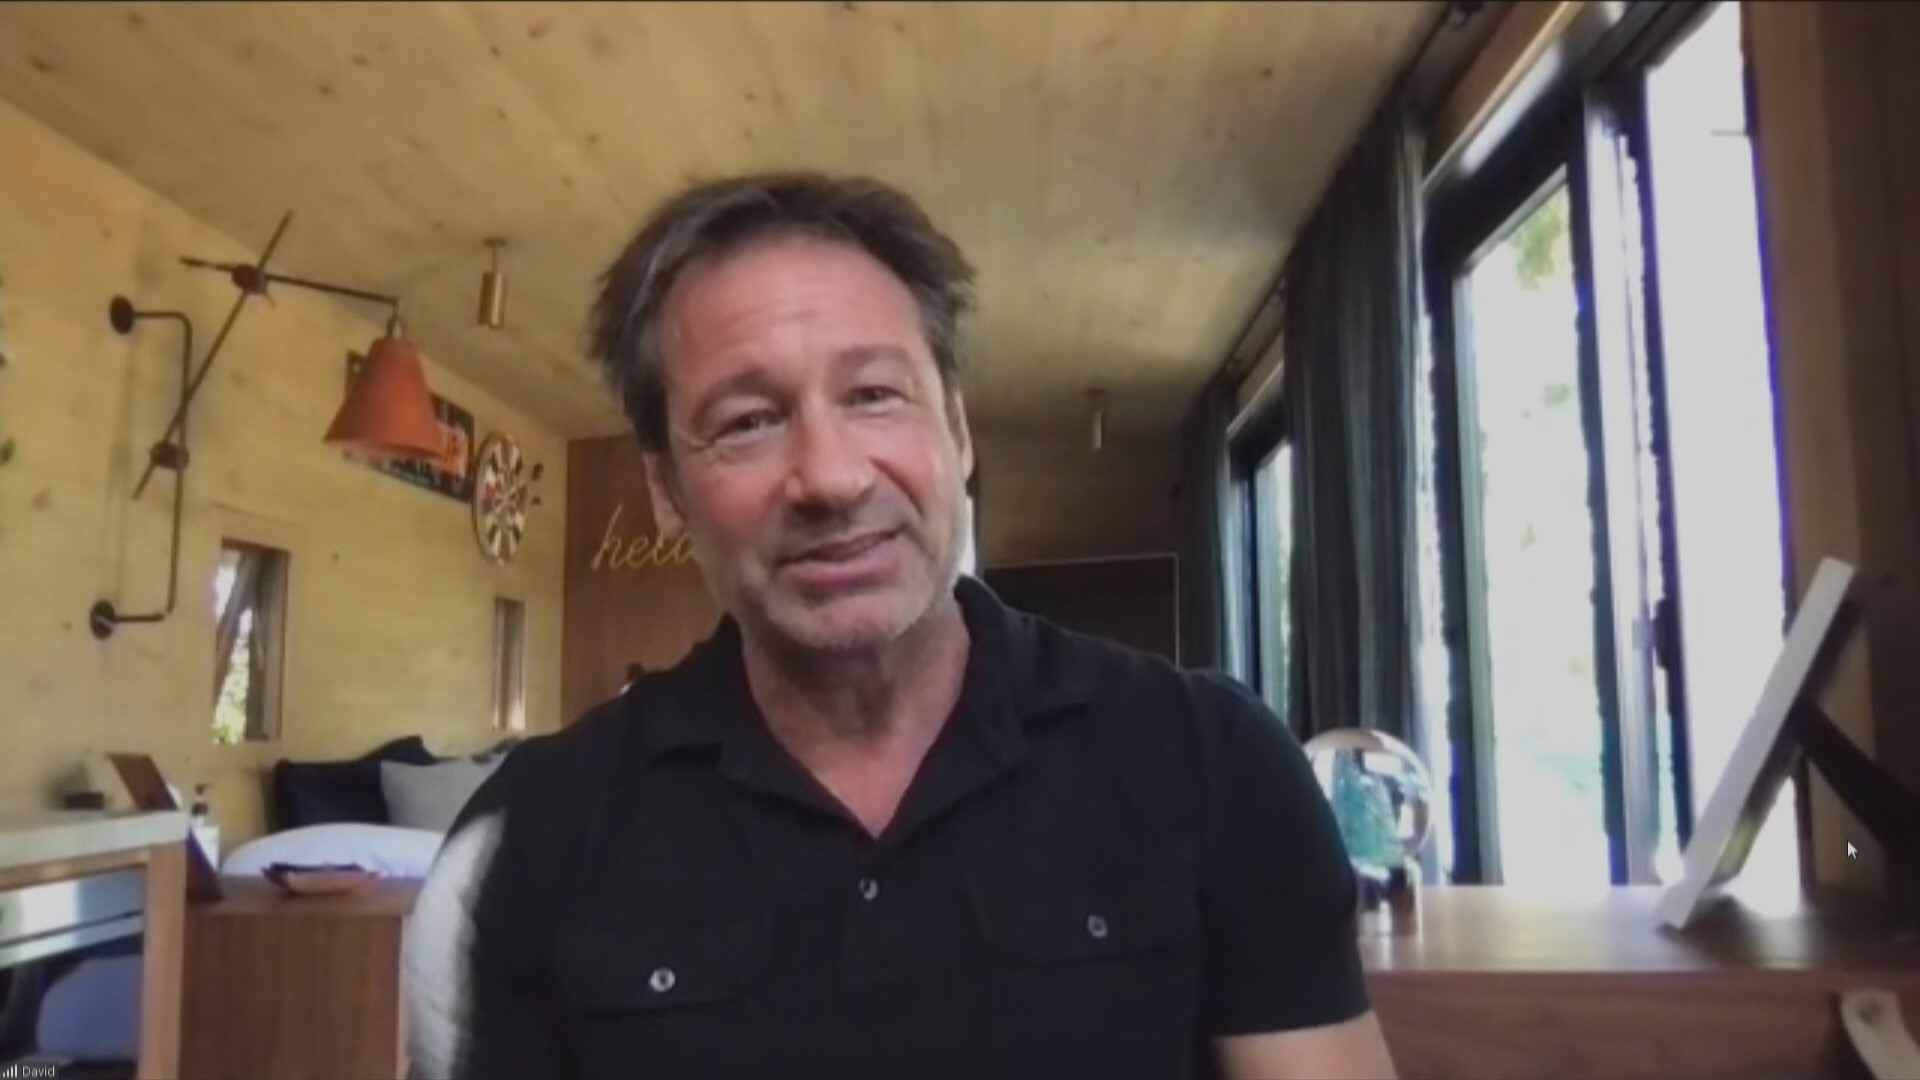 David Duchovny is known for his role in the popular TV series "The X Files." He's also a published author and will talk about his latest book at Powell's Books.